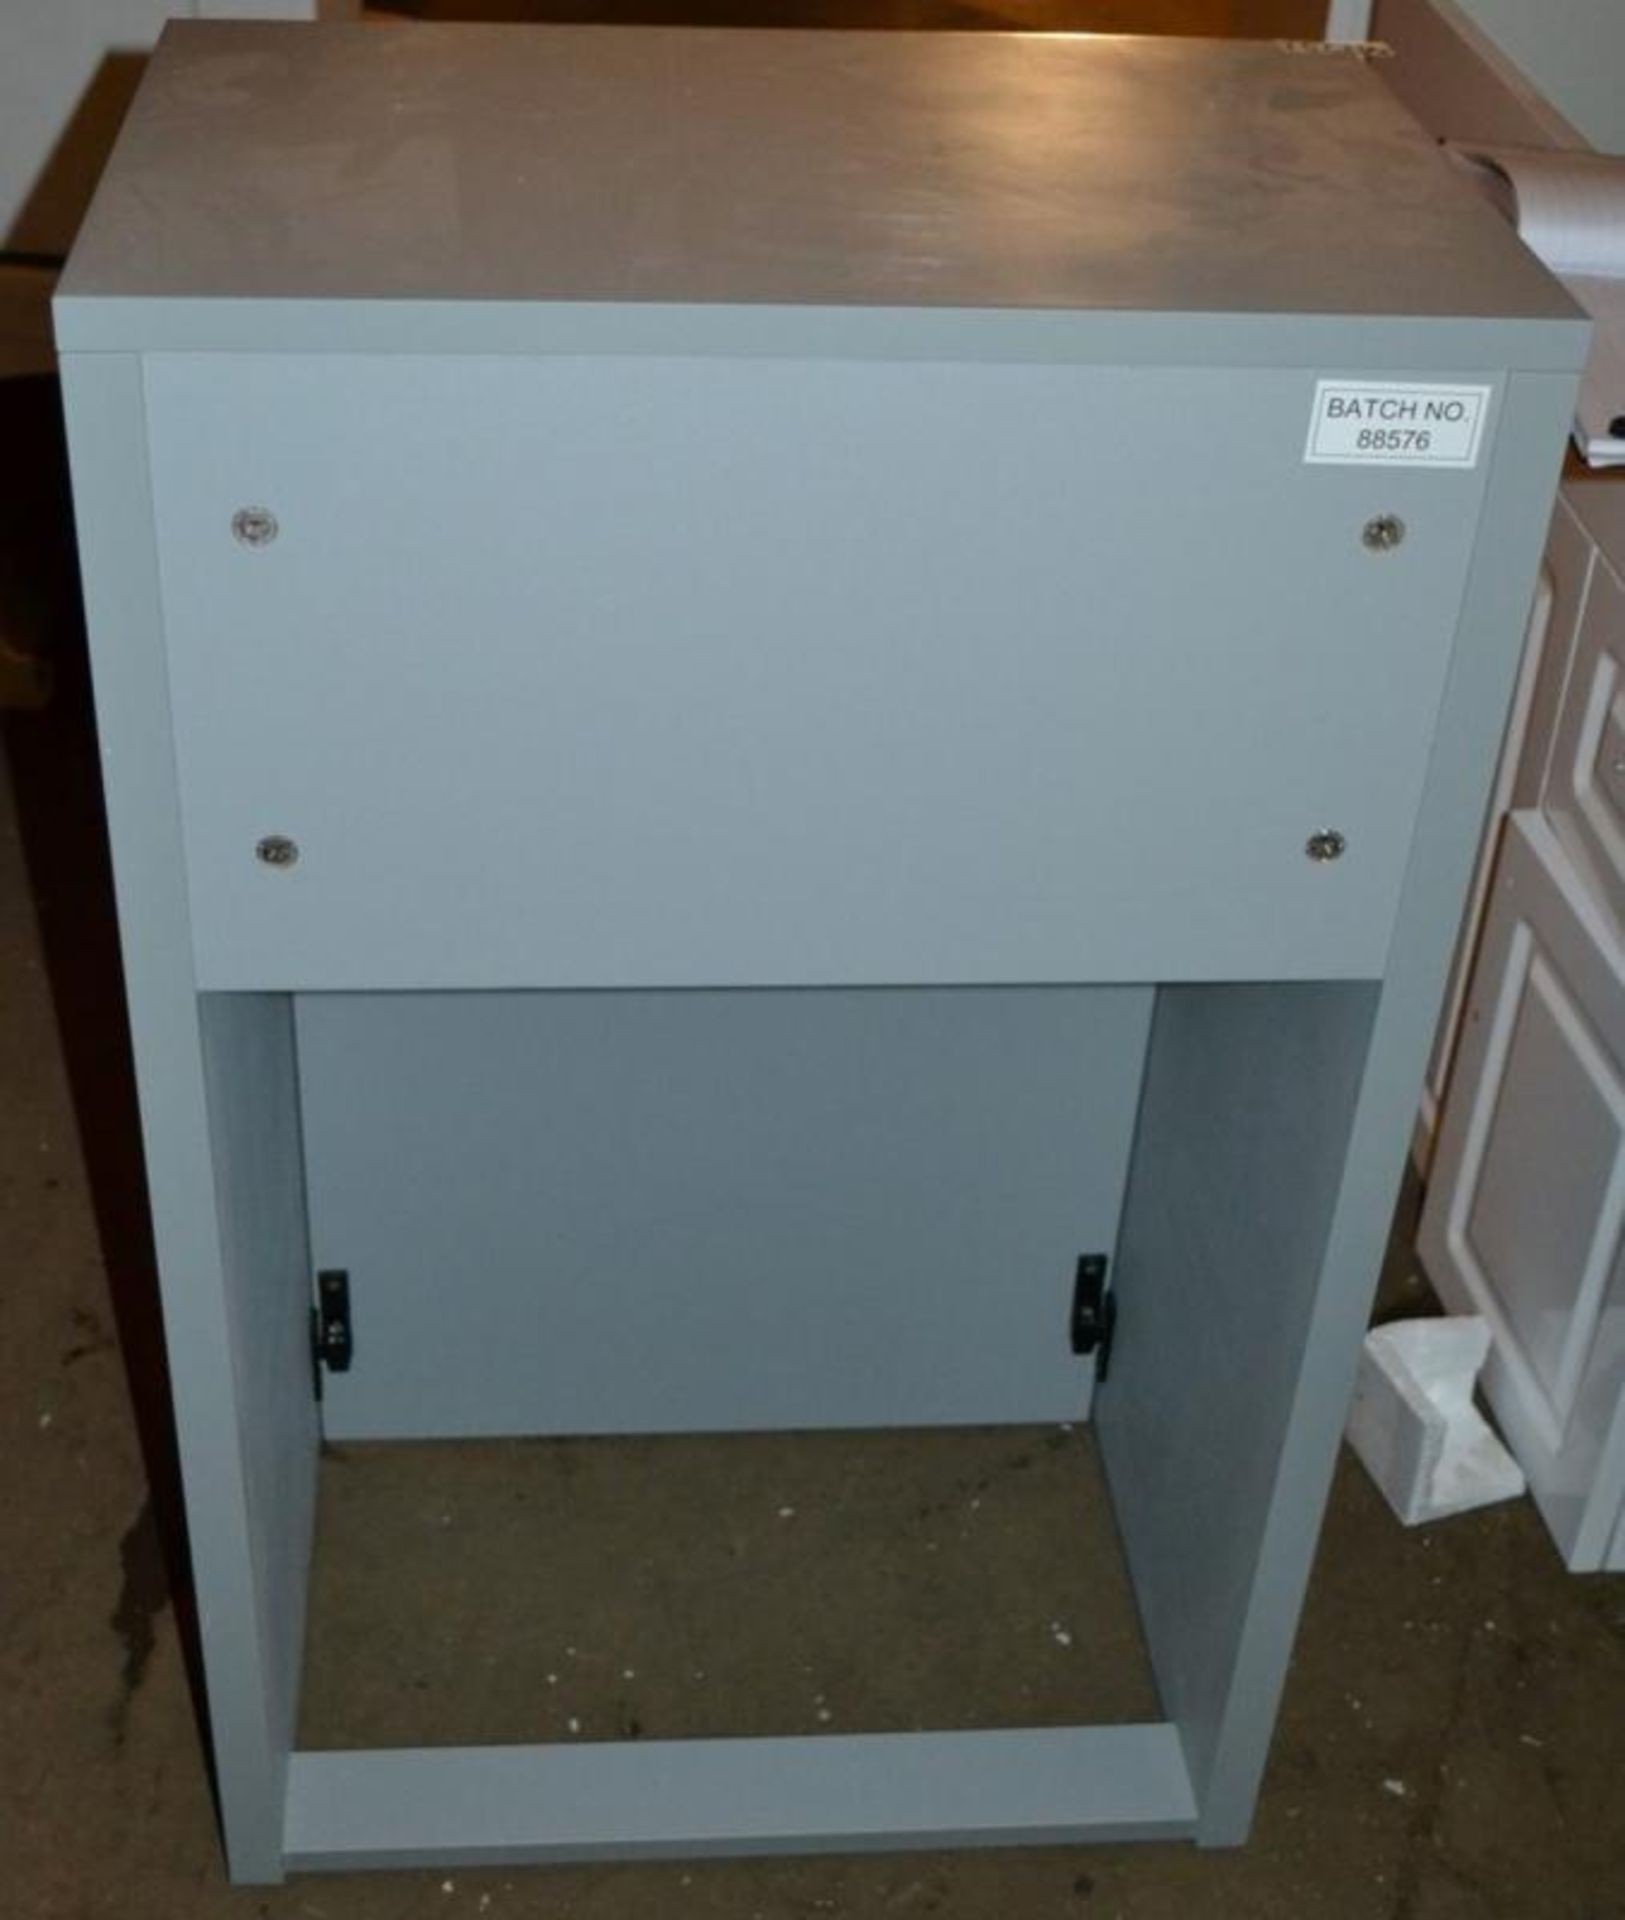 1 x Winchester Back To Wall Unit In Grey (DULBTWEGR) - New / Unused Stock - Dimensions: D33 x W50.2 - Image 3 of 3